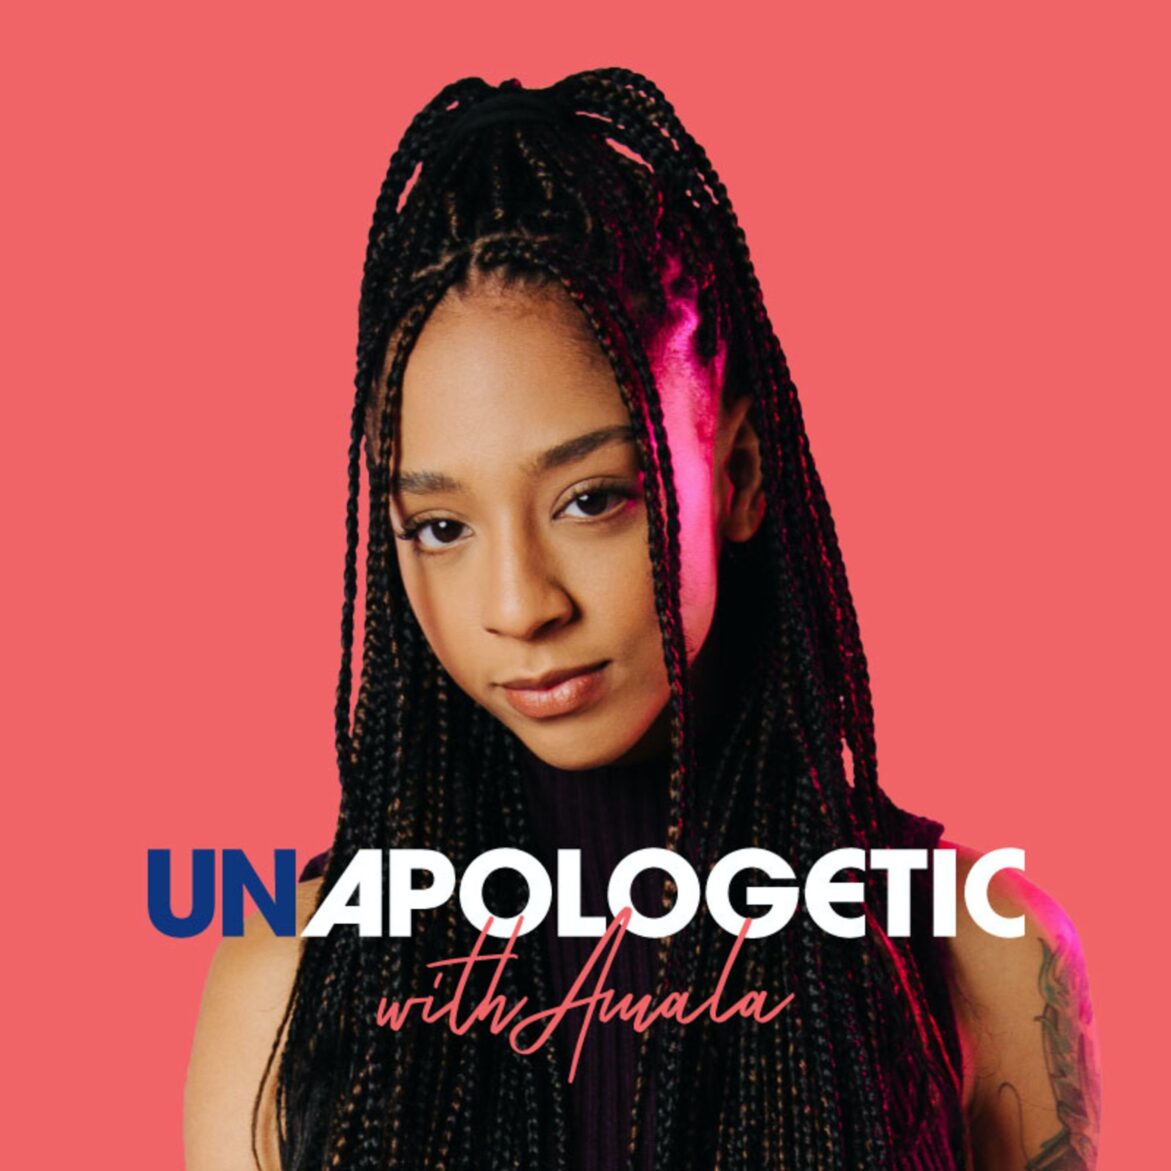 Black Podcasting - REACTING to TikTok Dating & Life Advice - Unapologetic LIVE 04/22/22